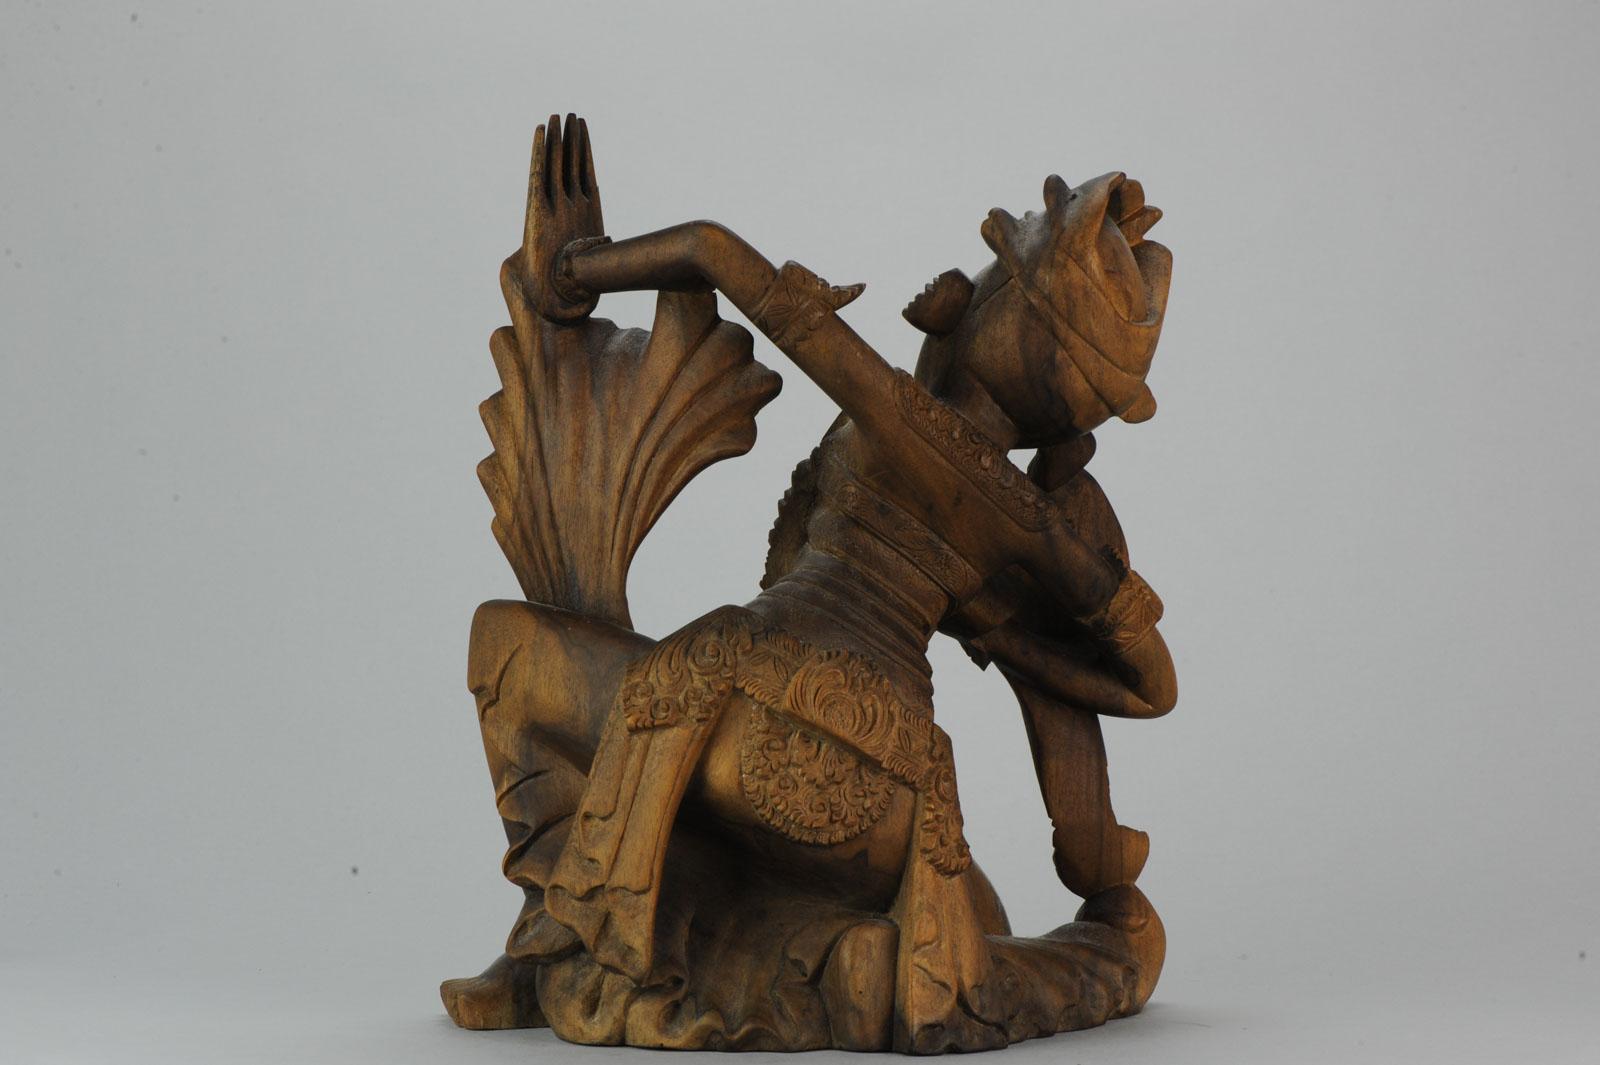 Chinese Vintage Wooden Figure Bali Indonesia Statue Wood For Sale